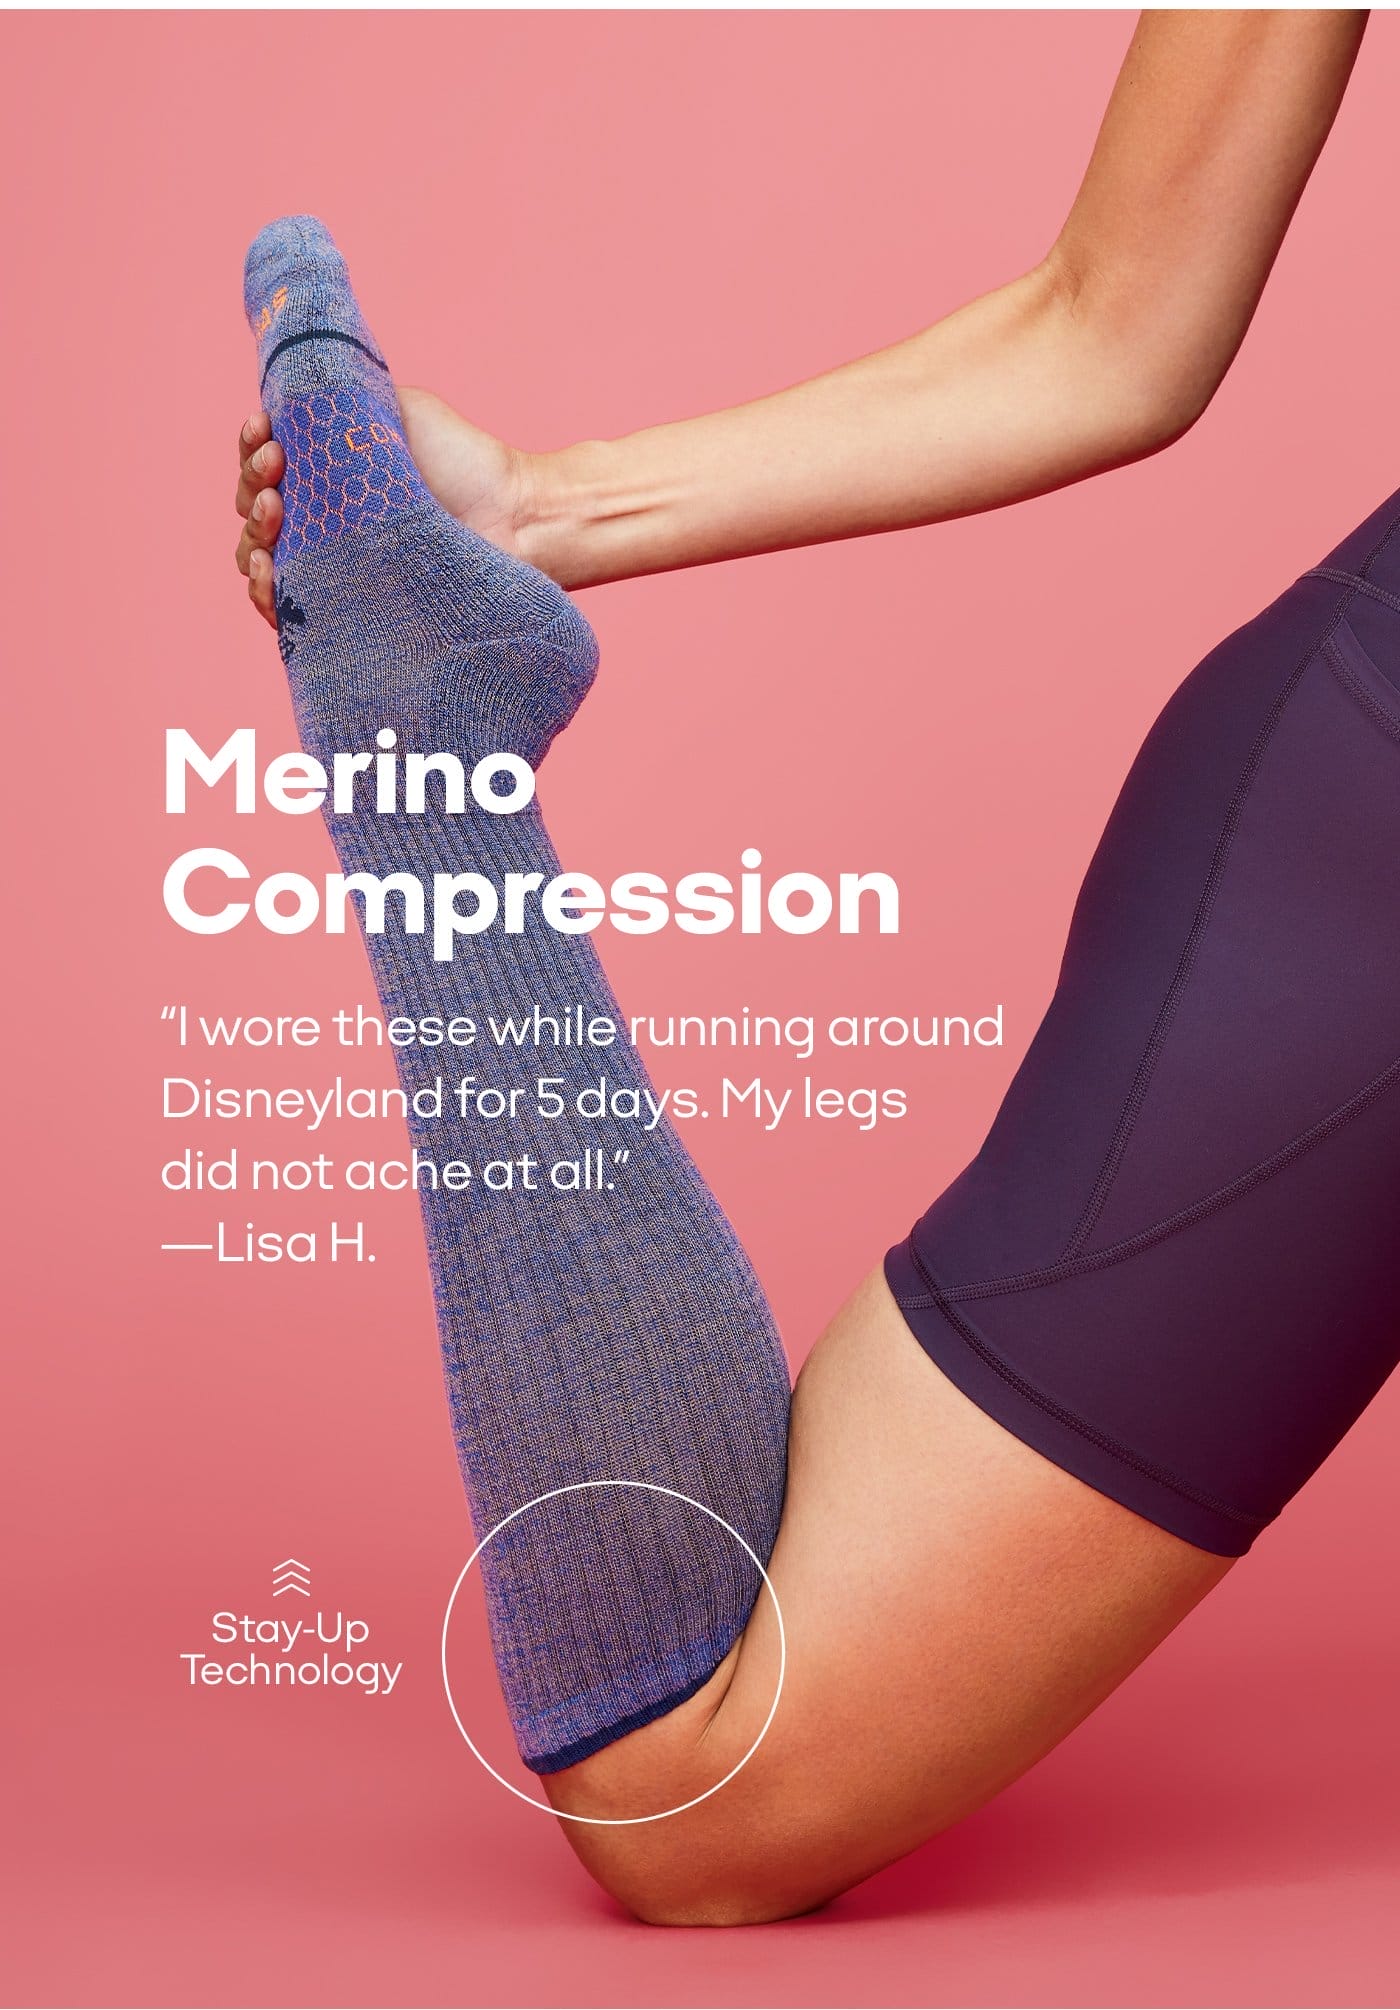 Merino Compression | “I wore these while running around Disneyland for 5 days. My legs did not ache at all.” -Lisa H. | Stay-Up Technology